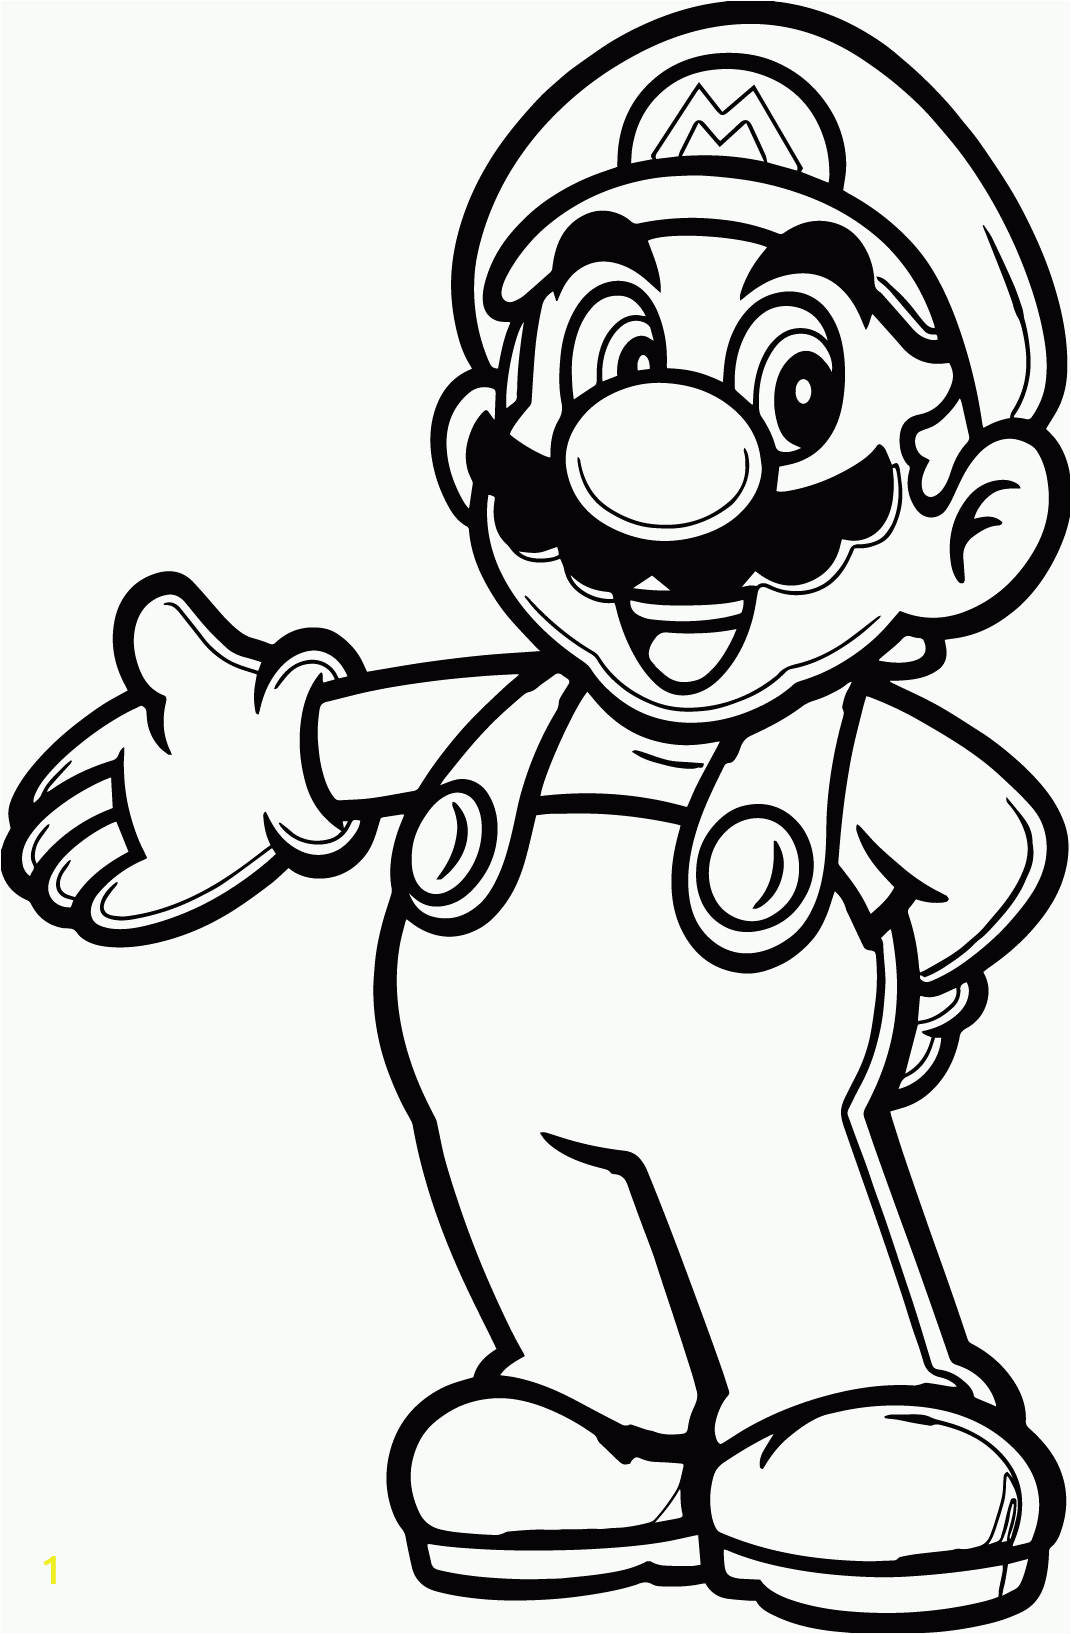 mario bad guy coloring pages